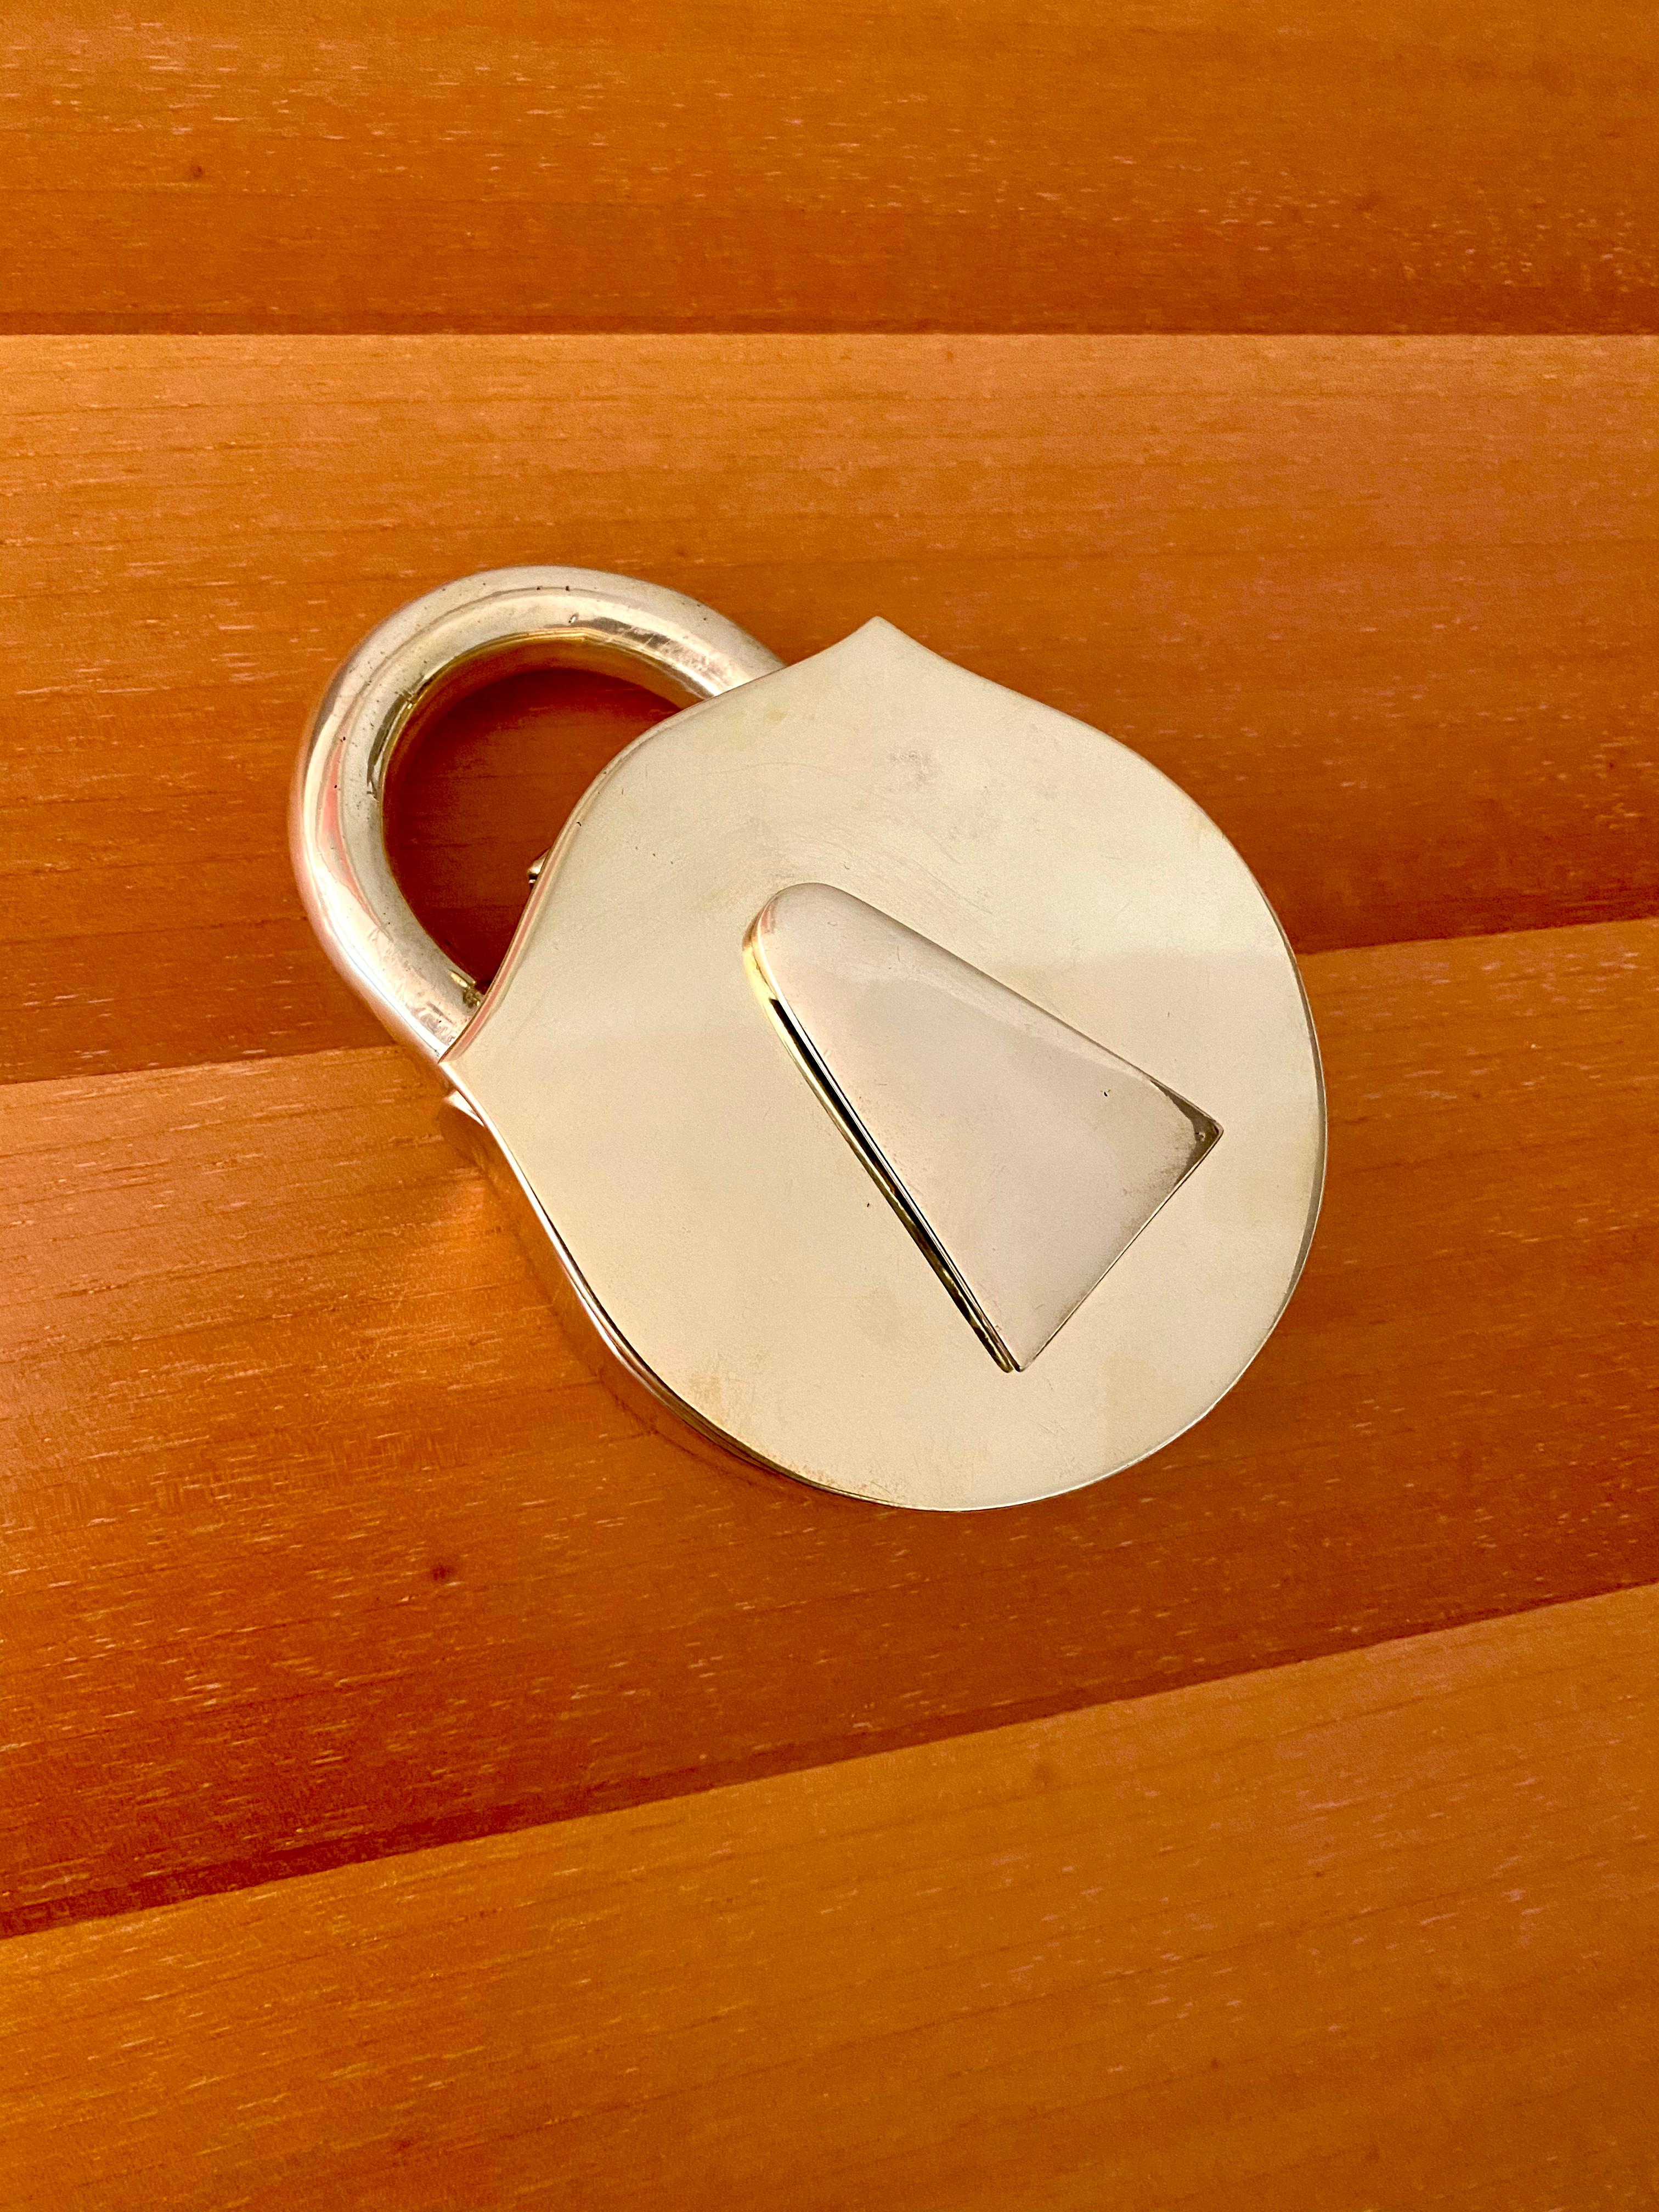 A heavy solid brass padlock, which opens to a black interior, and has a movable key cover, manufactured in Waynesboro, Virginia by Virginia Metalcrafters. The padlock was originally intended to be an ashtray, but can be used as a paper weight or box